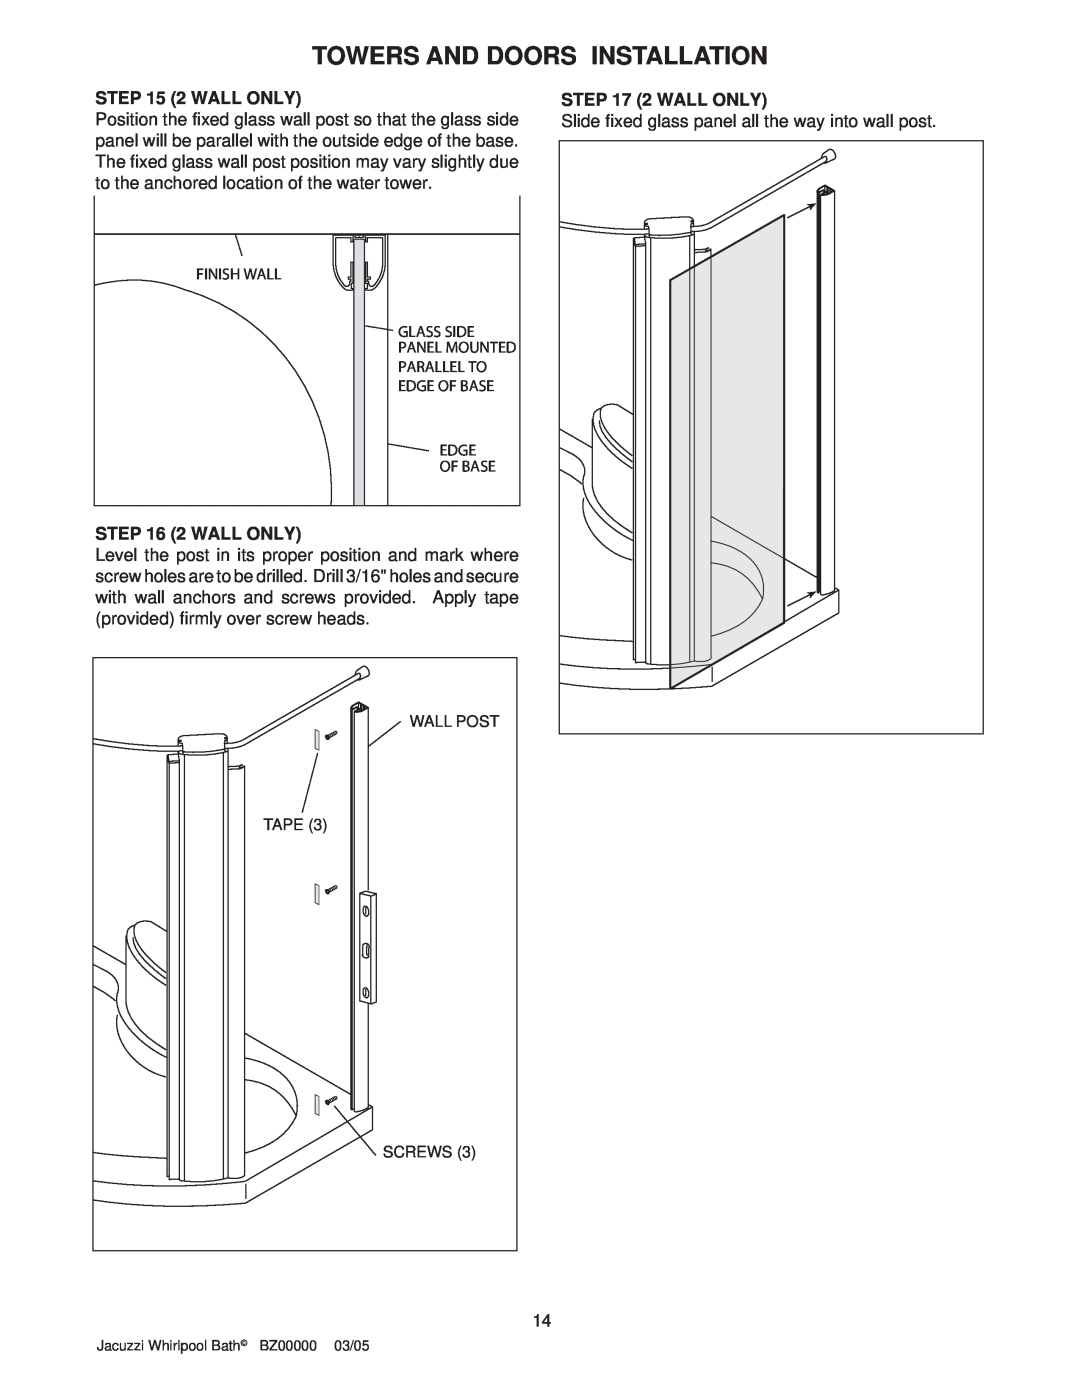 Jacuzzi BZ00000 operating instructions 2 WALL ONLY, Towers And Doors Installation 